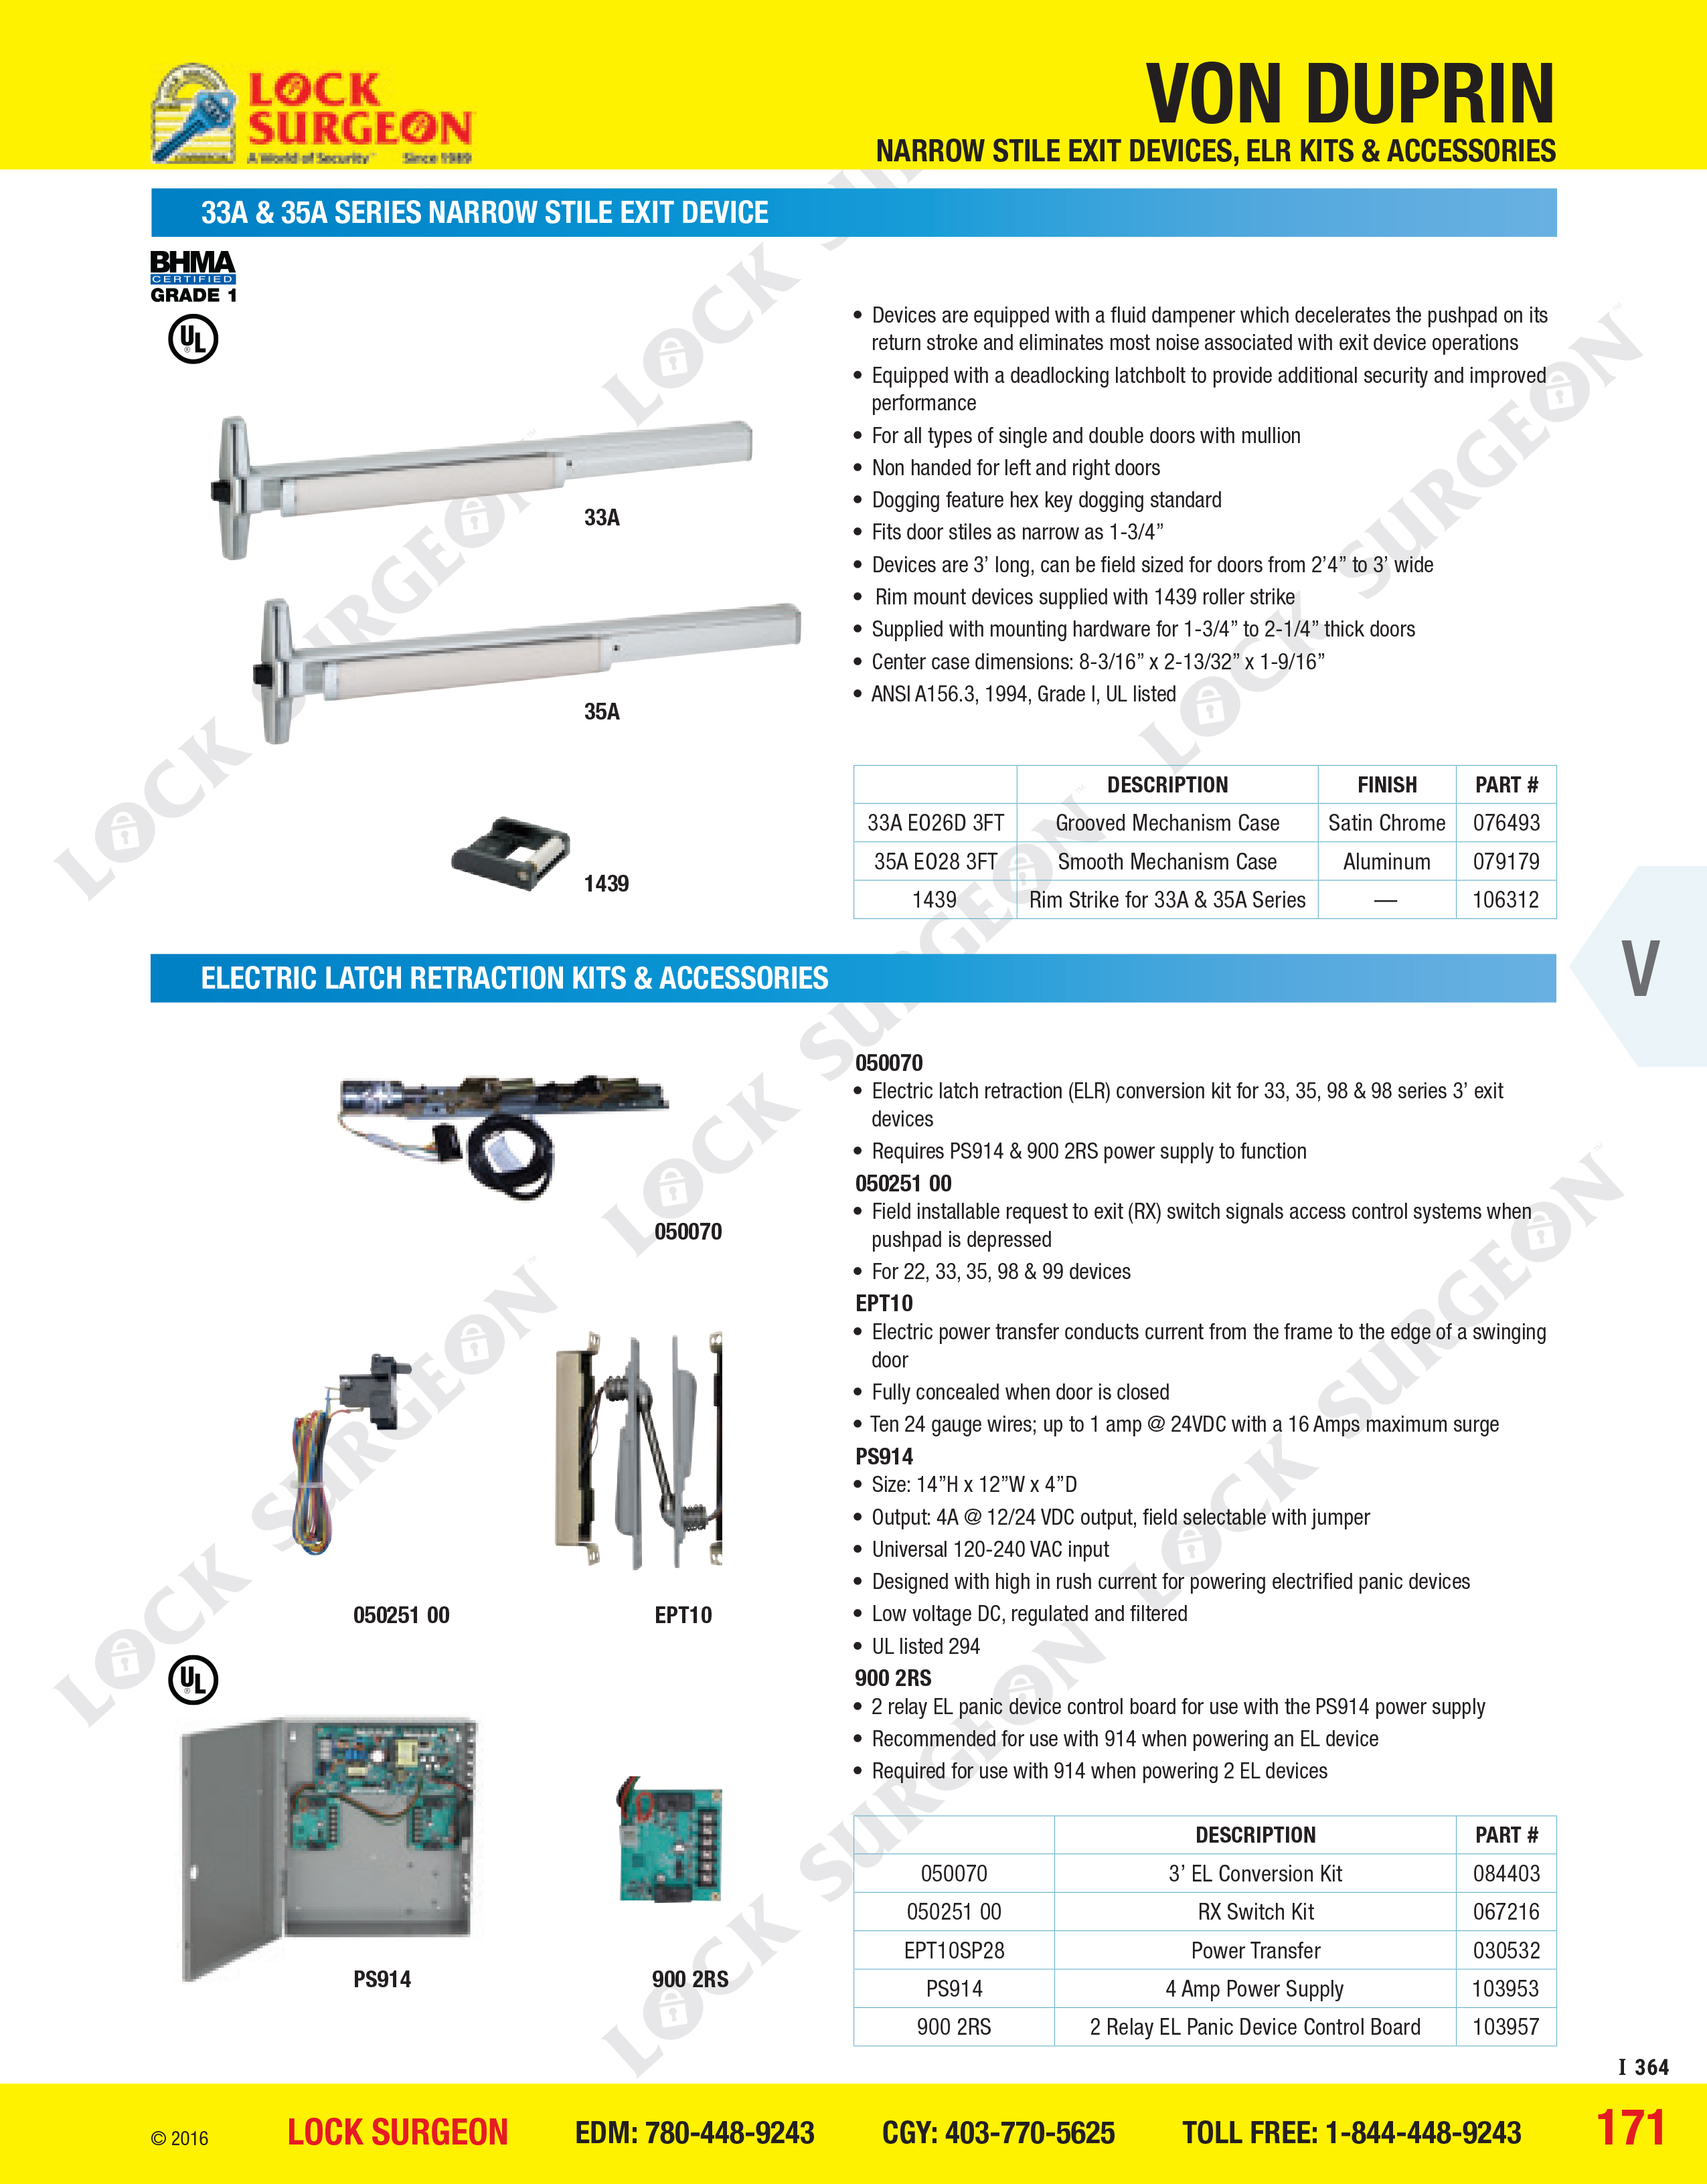 Calgary Von Duprin narrow-stile exit devices, electronic latch retraction kits & accessories.